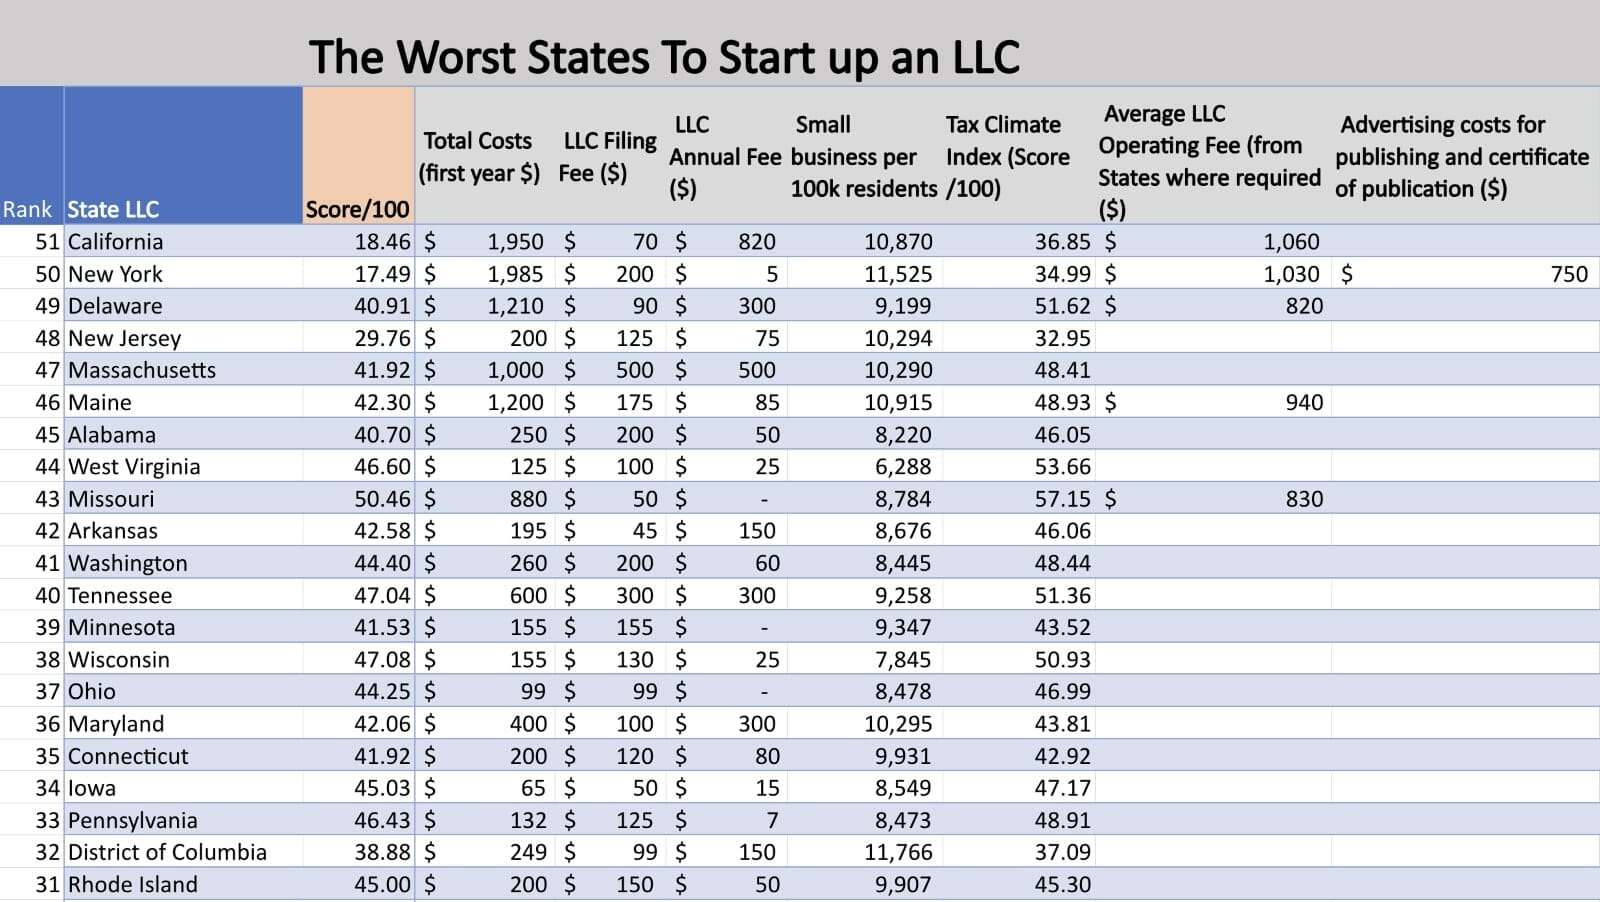 The Worst States To Startup An LLC